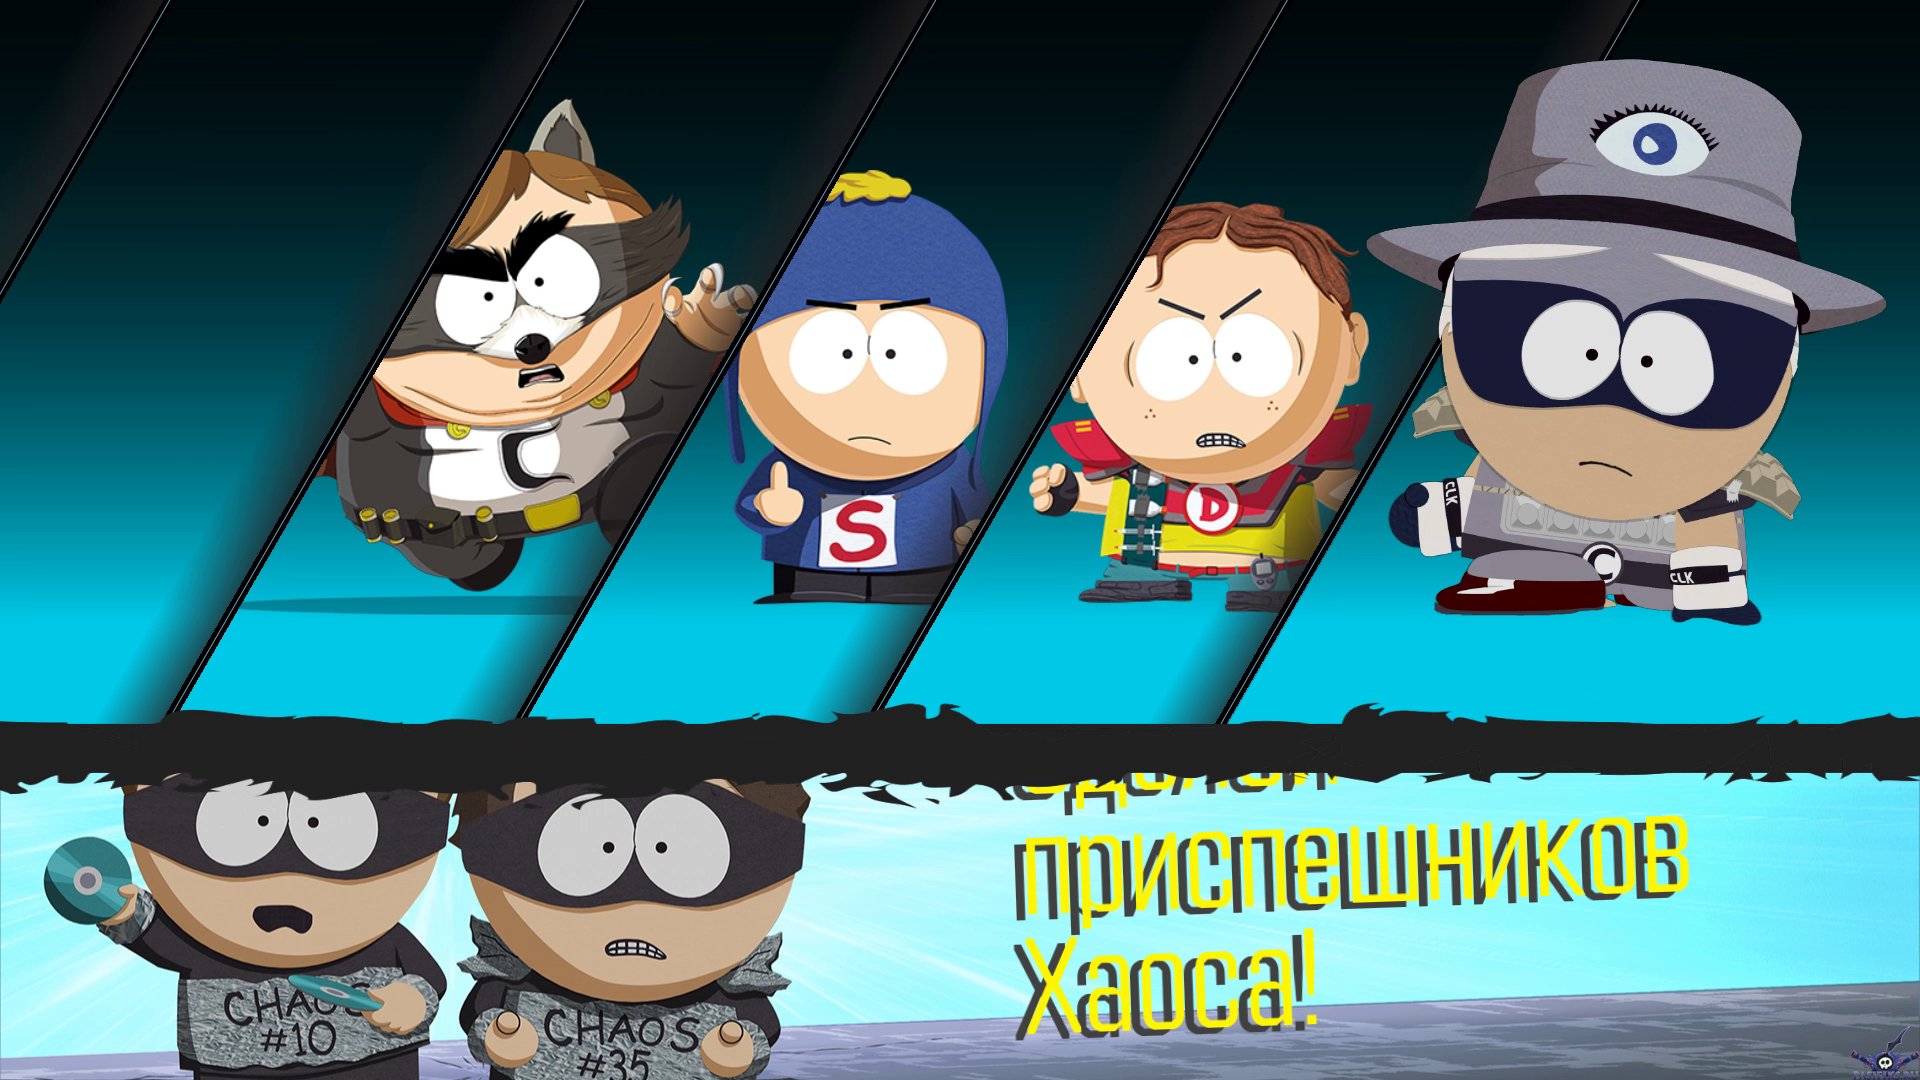 South park the fractured but whole купить ключ steam фото 67